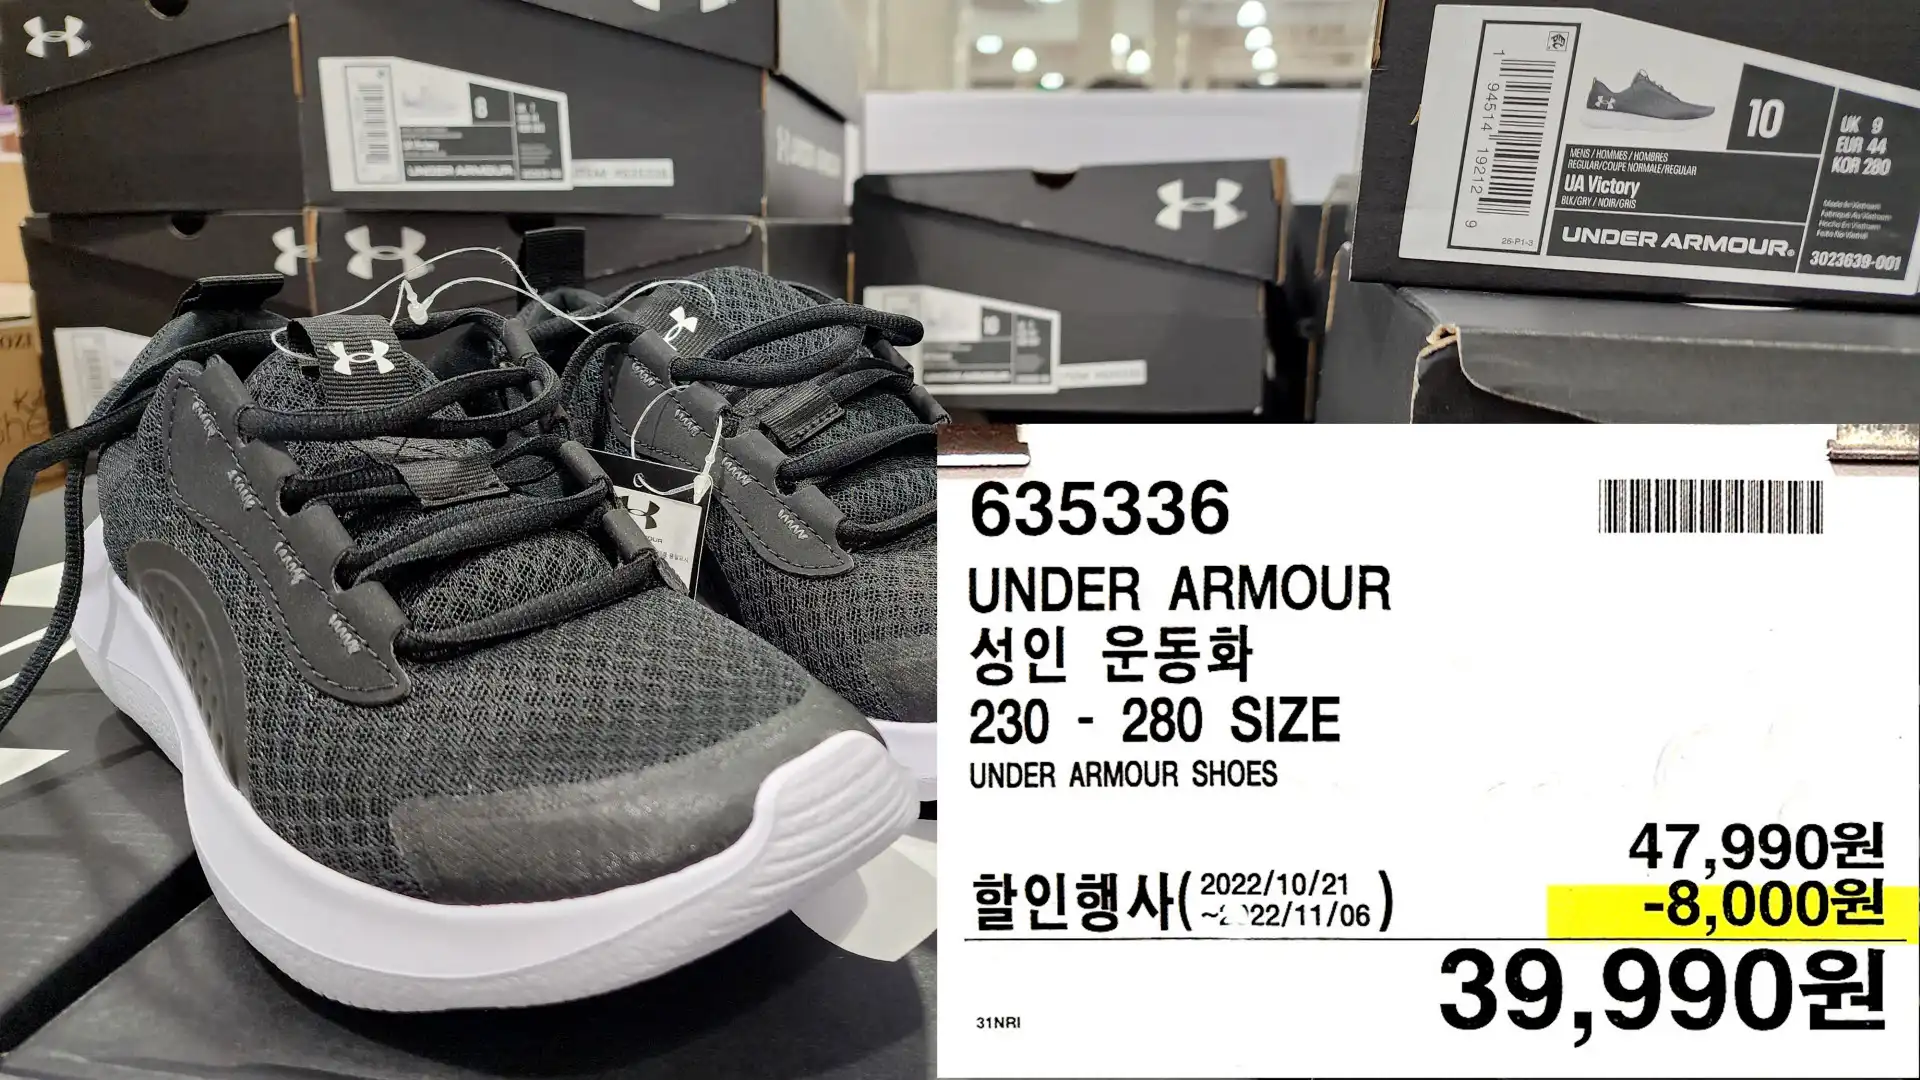 UNDER ARMOUR
성인 운동화
230-280 SIZE
UNDER ARMOUR SHOES
39&#44;990원